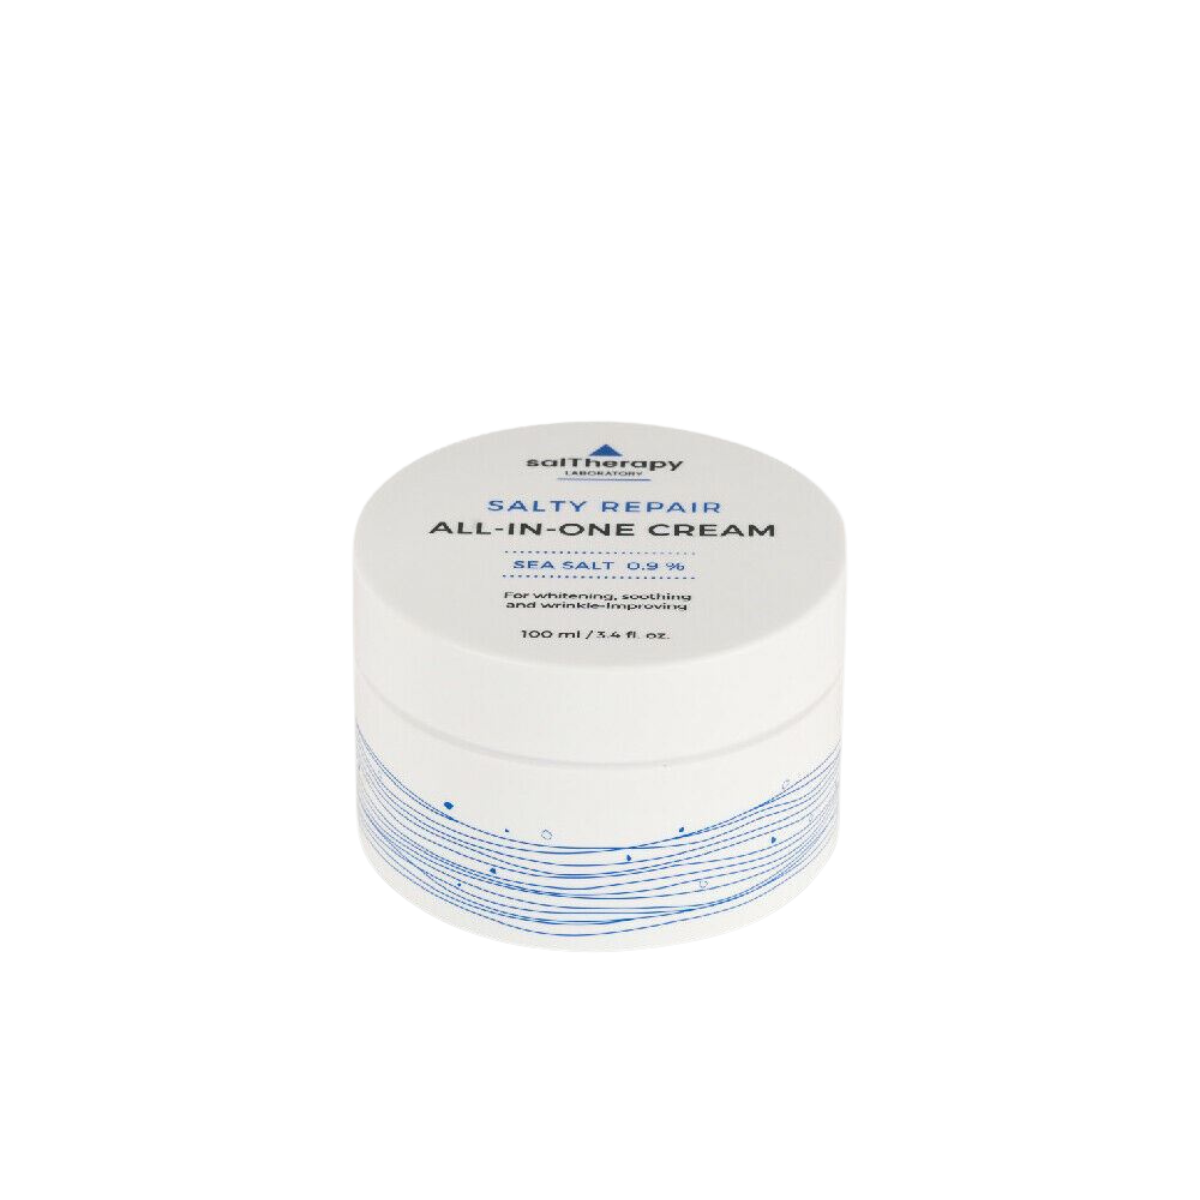 salTherapy Salty Repair All-In-One Cream 100ml - DODOSKIN